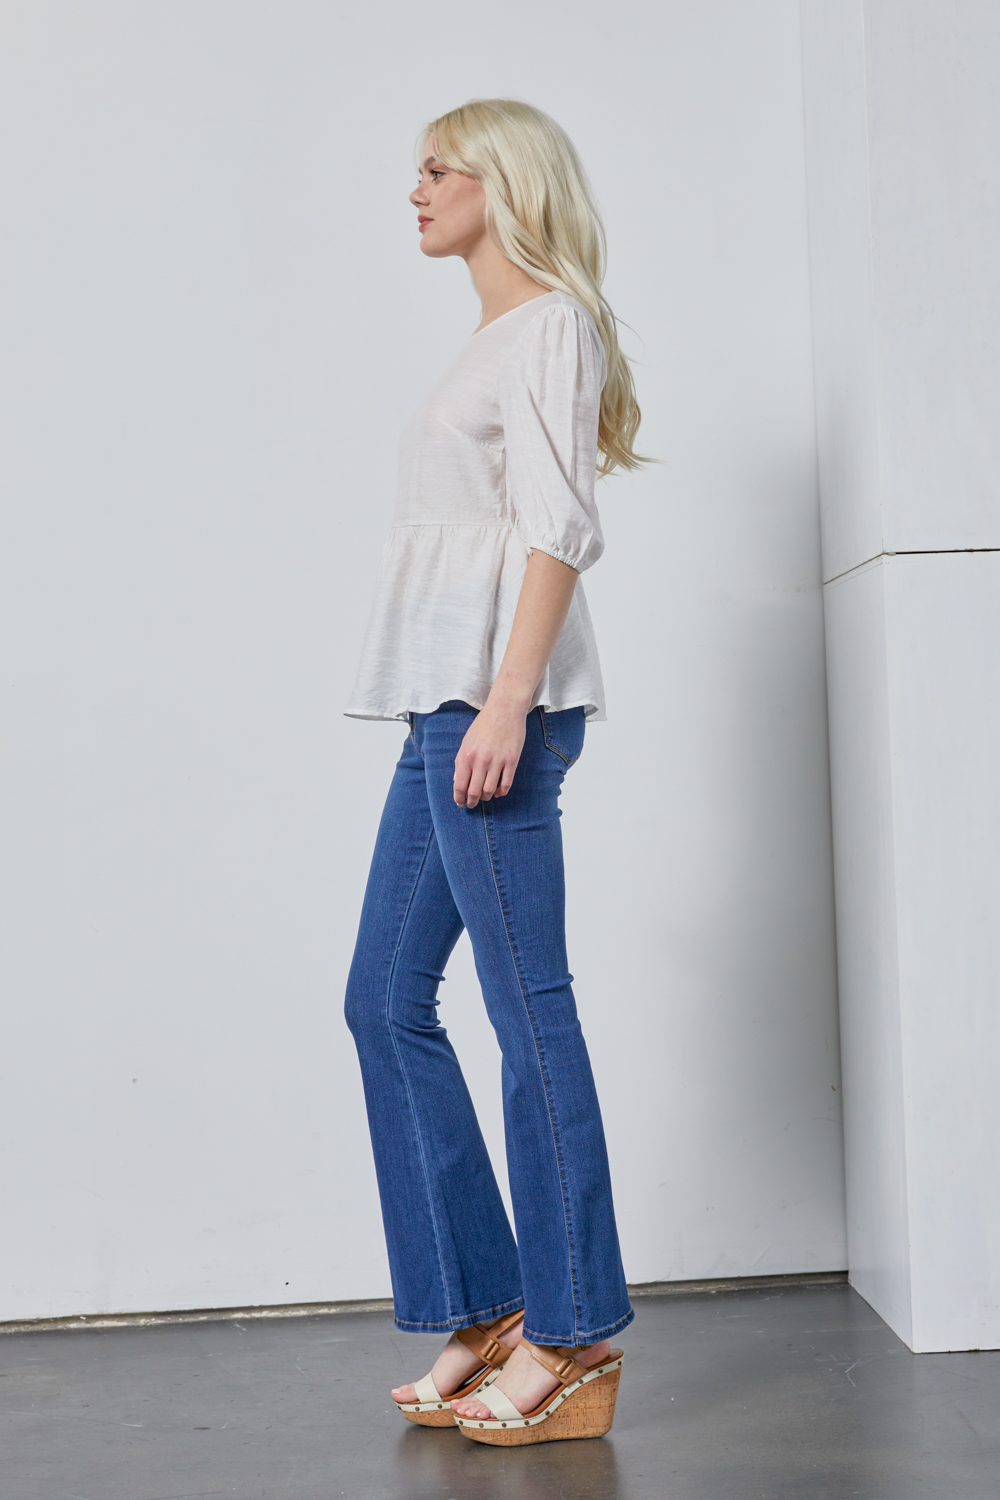 Elbow Length Solid Blouse